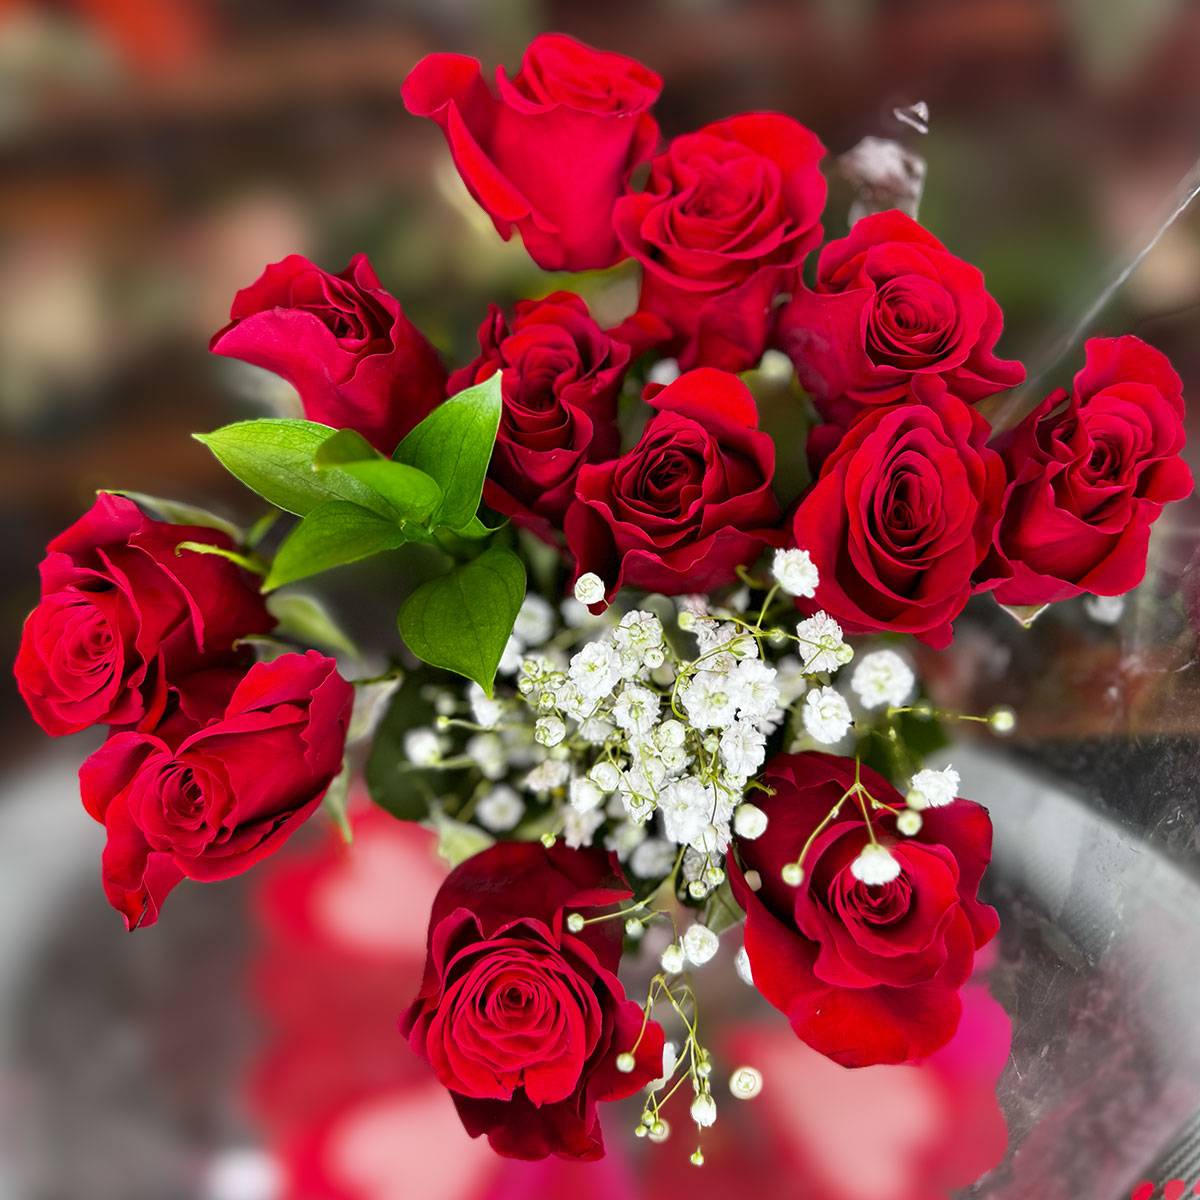 Exquisite Red Roses Floral Arrangement - Same Day Delivery - Flower delivery near you - Bonita Springs Florida